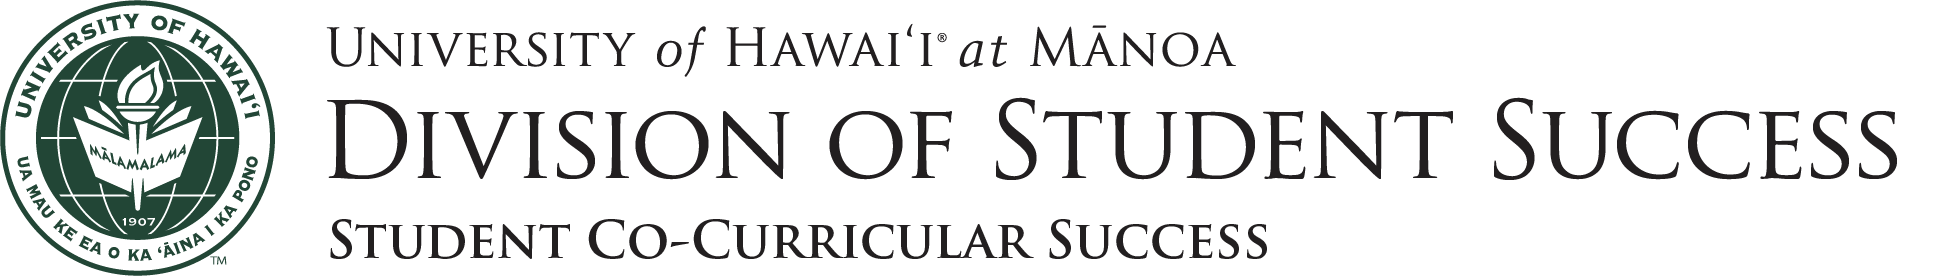 Student Co-Curricular Success - Division of Student Success logo